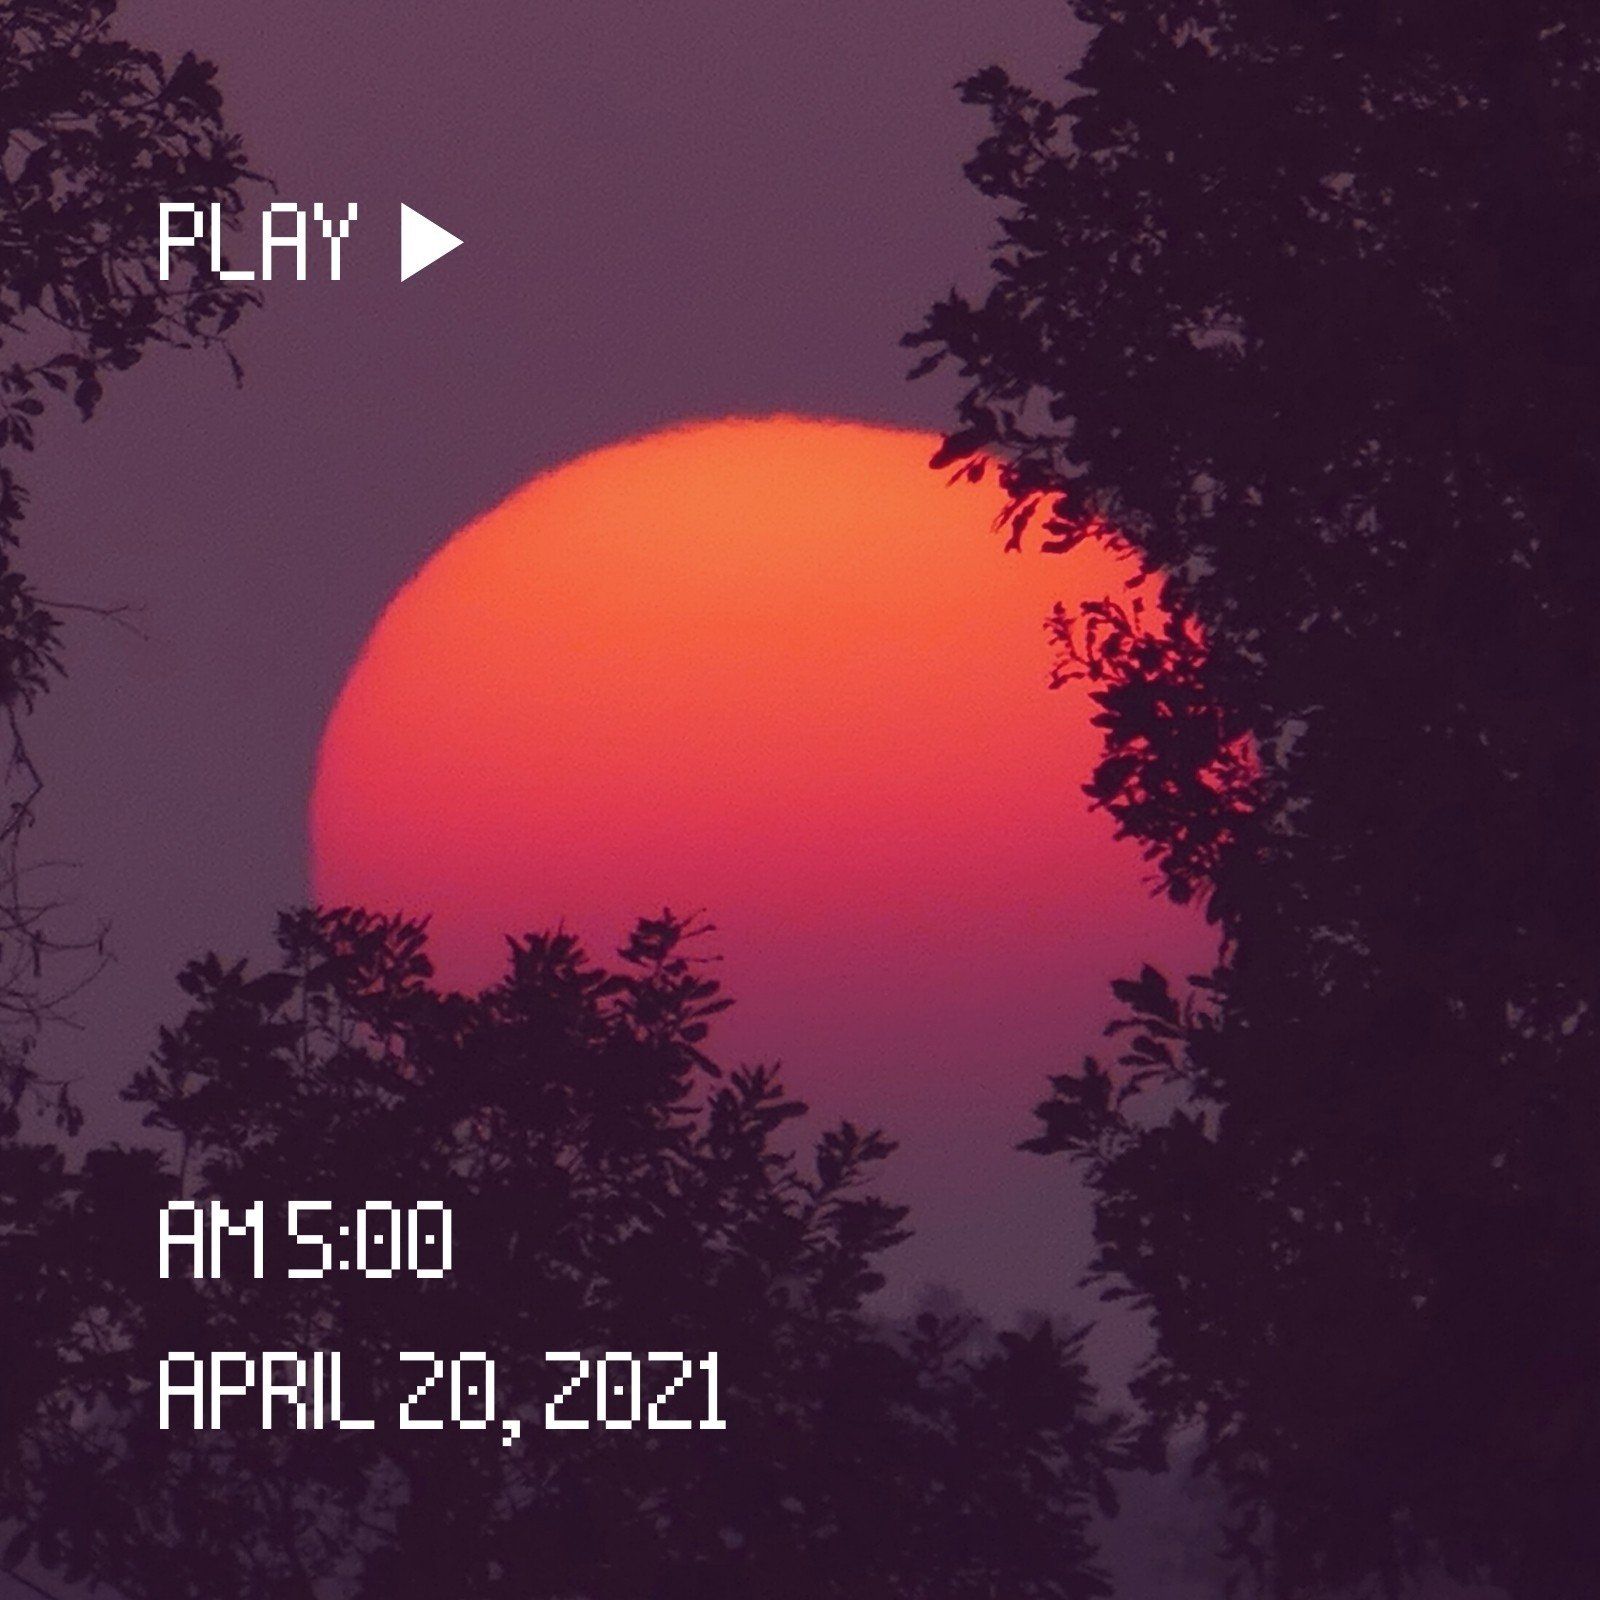 A red sun sets behind trees with the time and date displayed in white text. - Spotify